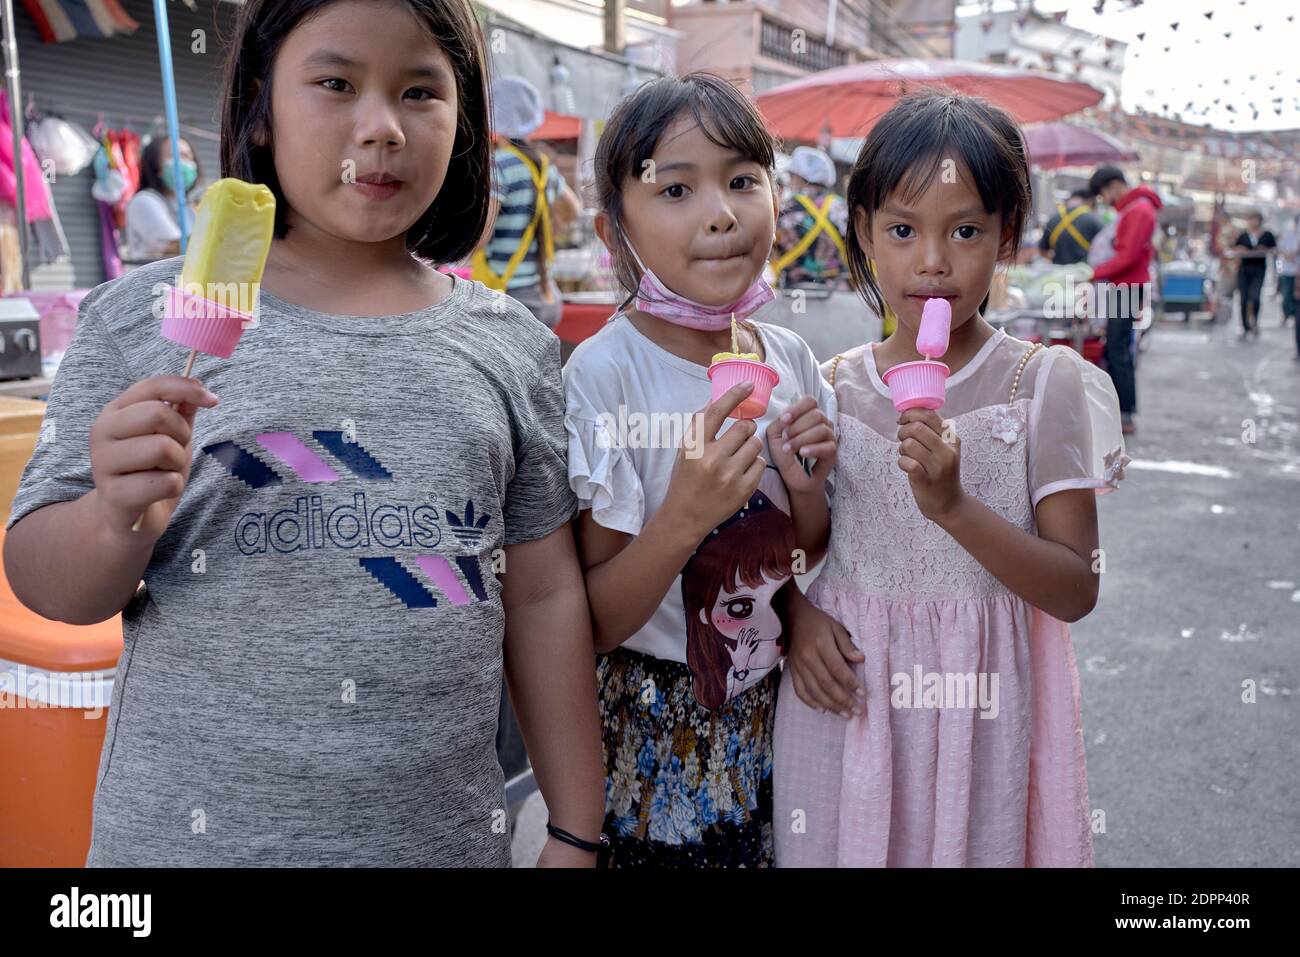 Children eating ice lollies outdoor. 3 young friends. Stock Photo